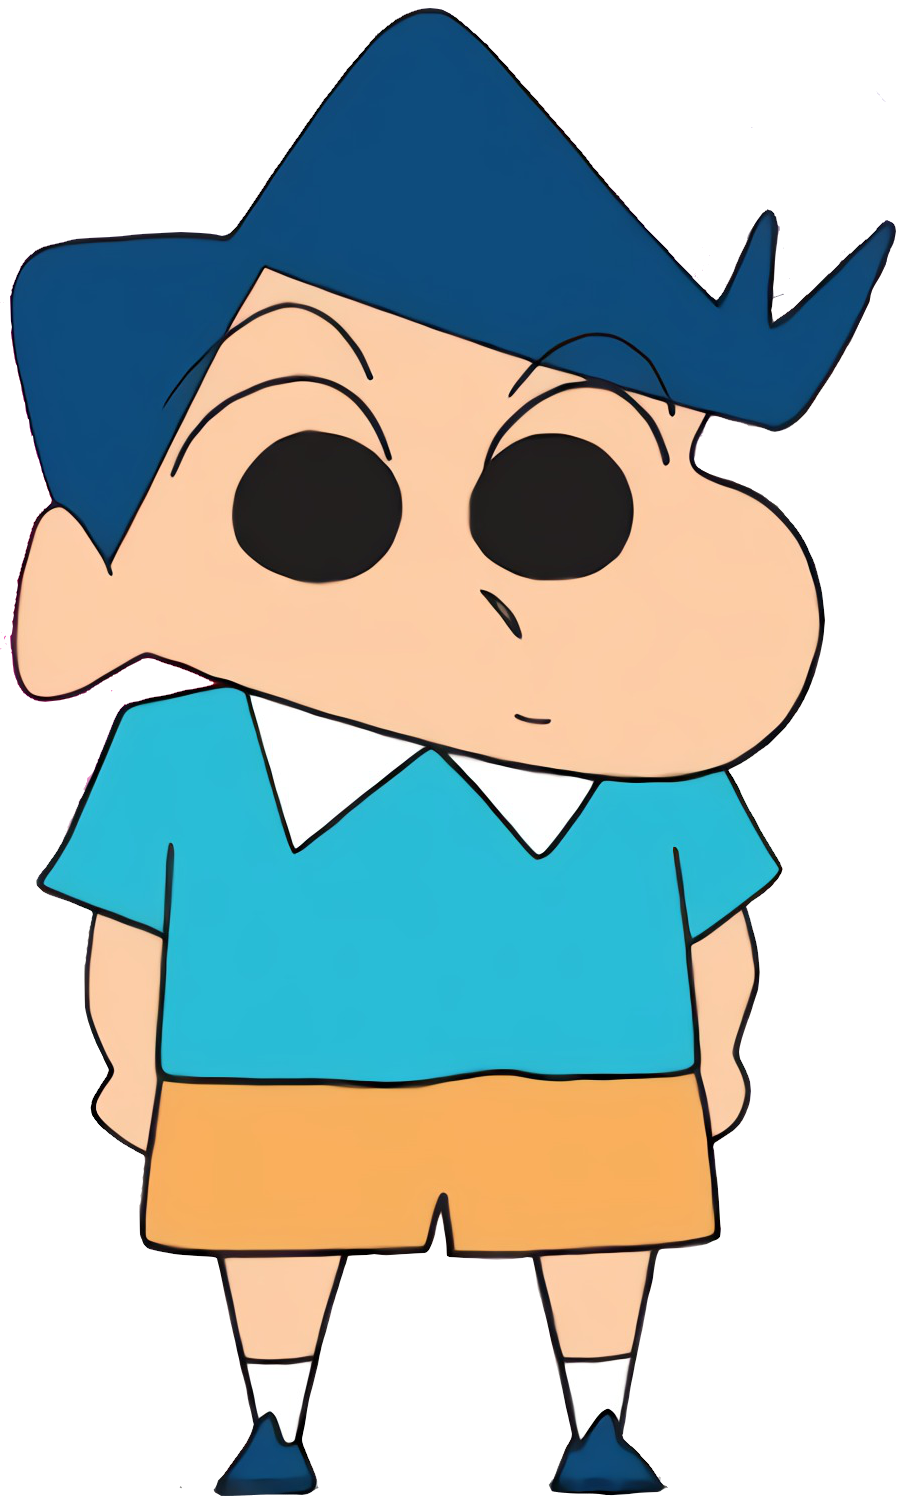 Why was Shin Chan banned in India in 2008? - Quora